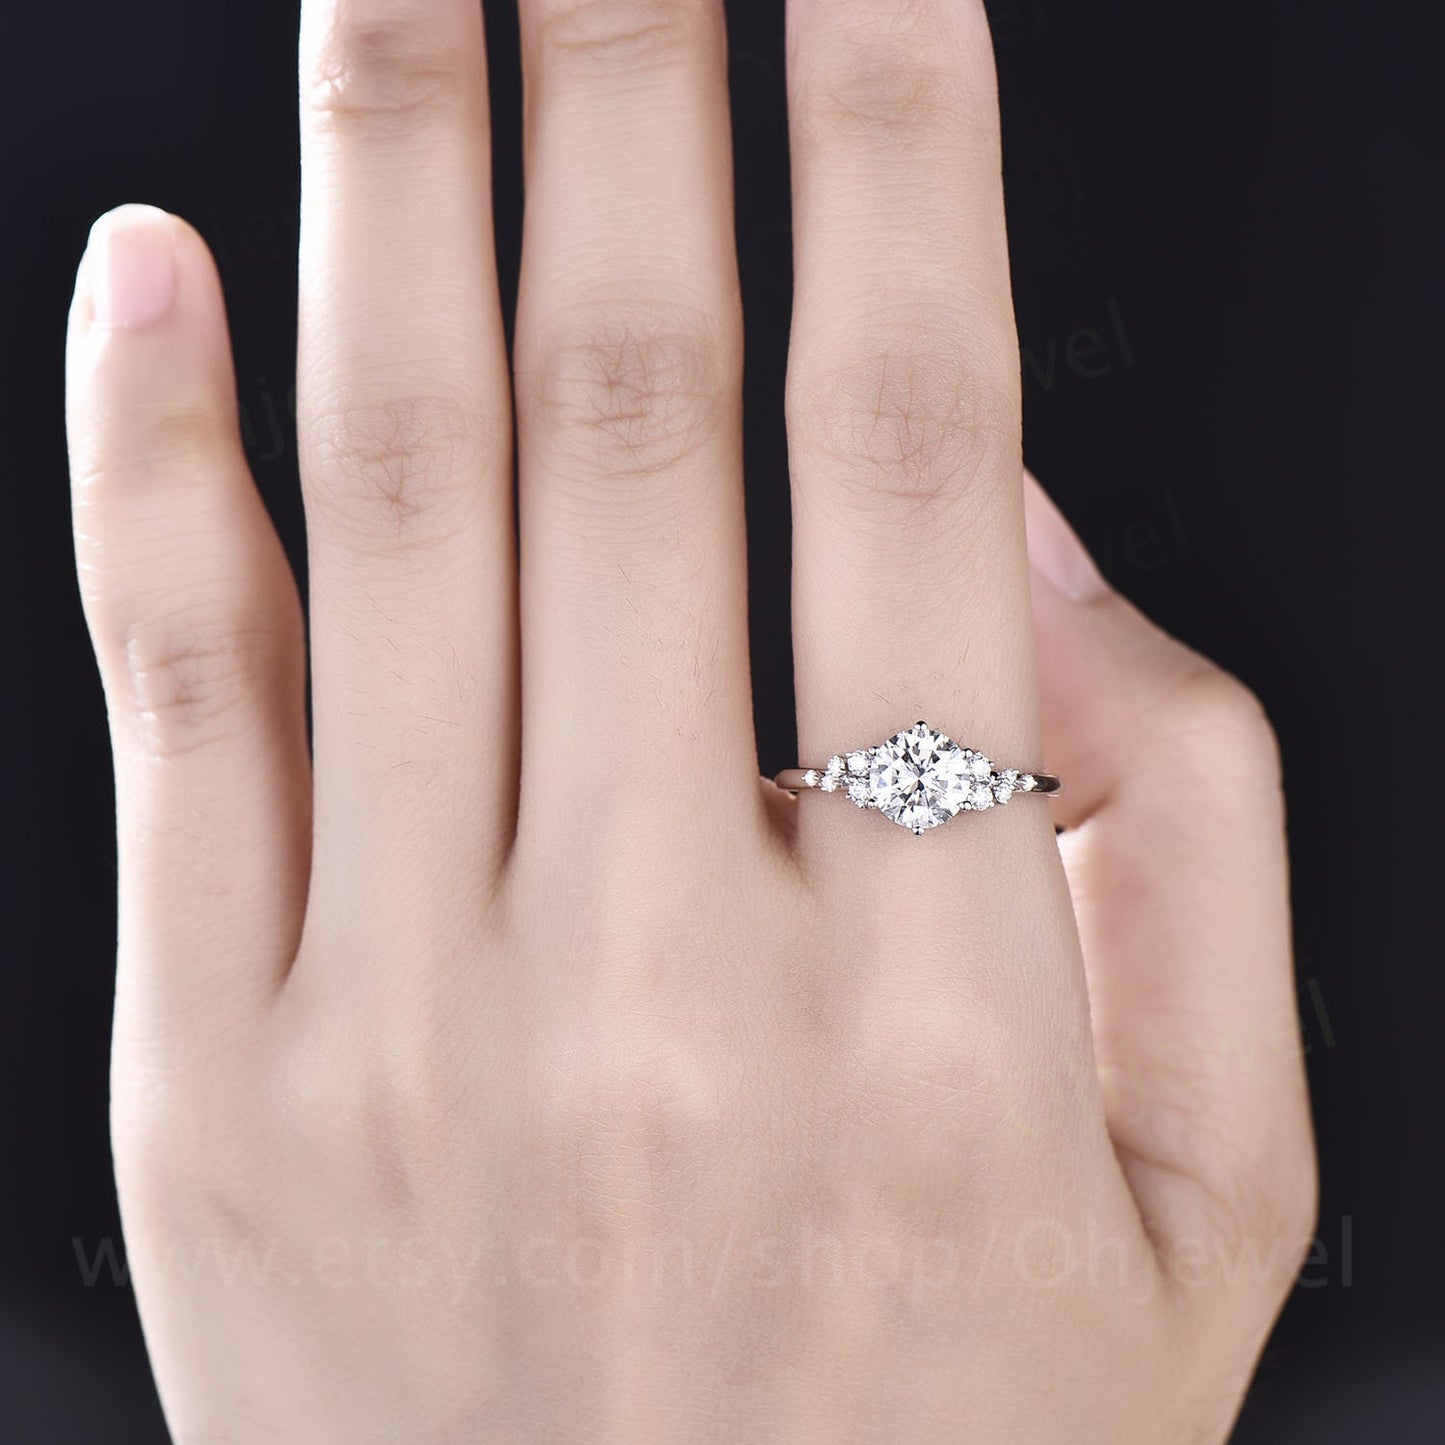 Cluster unique vintage moissanite engagement ring rose gold silver round cut promise ring women six prong ring custom bridal wedding ring